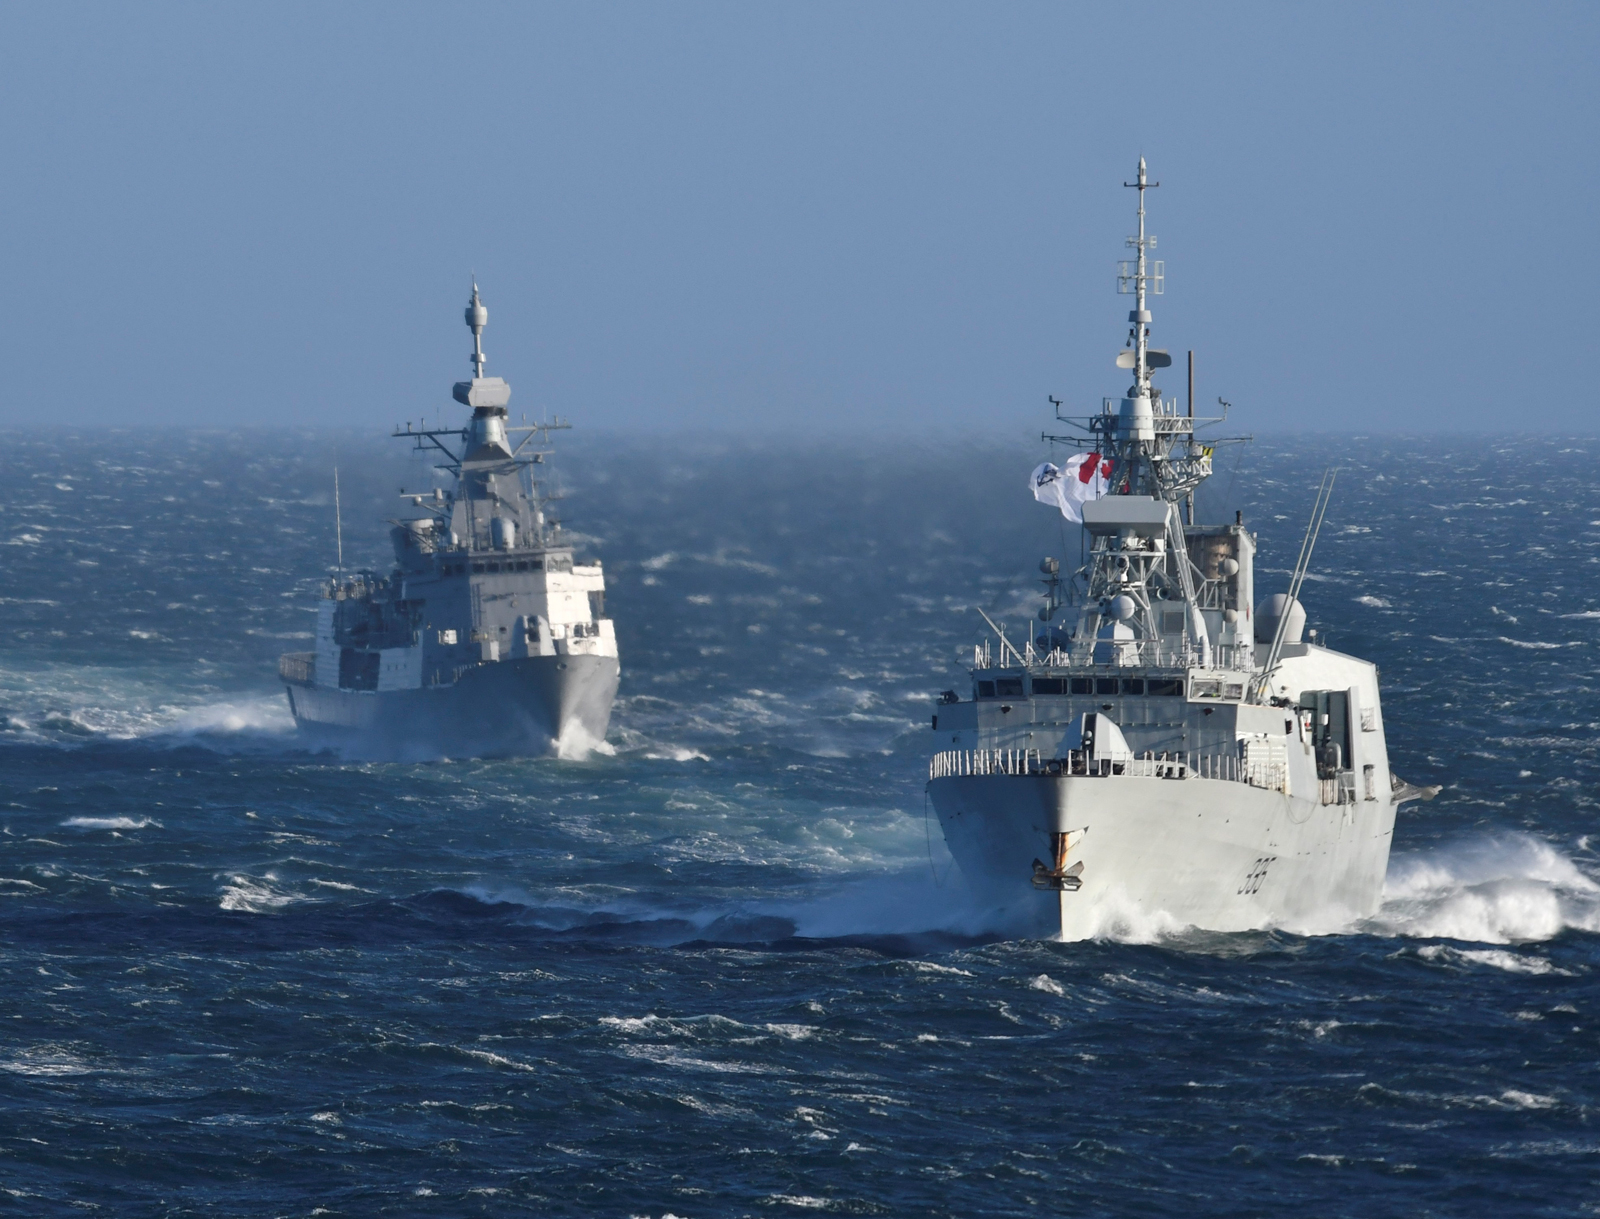 HMCS Calgary (left) and HMNZS Te Kaha (right) conduct a sail past Esquimalt Lagoon as Te Kaha heads back to New Zealand after spending 18 months in Esquimalt completing an extensive upgrade and refit program.